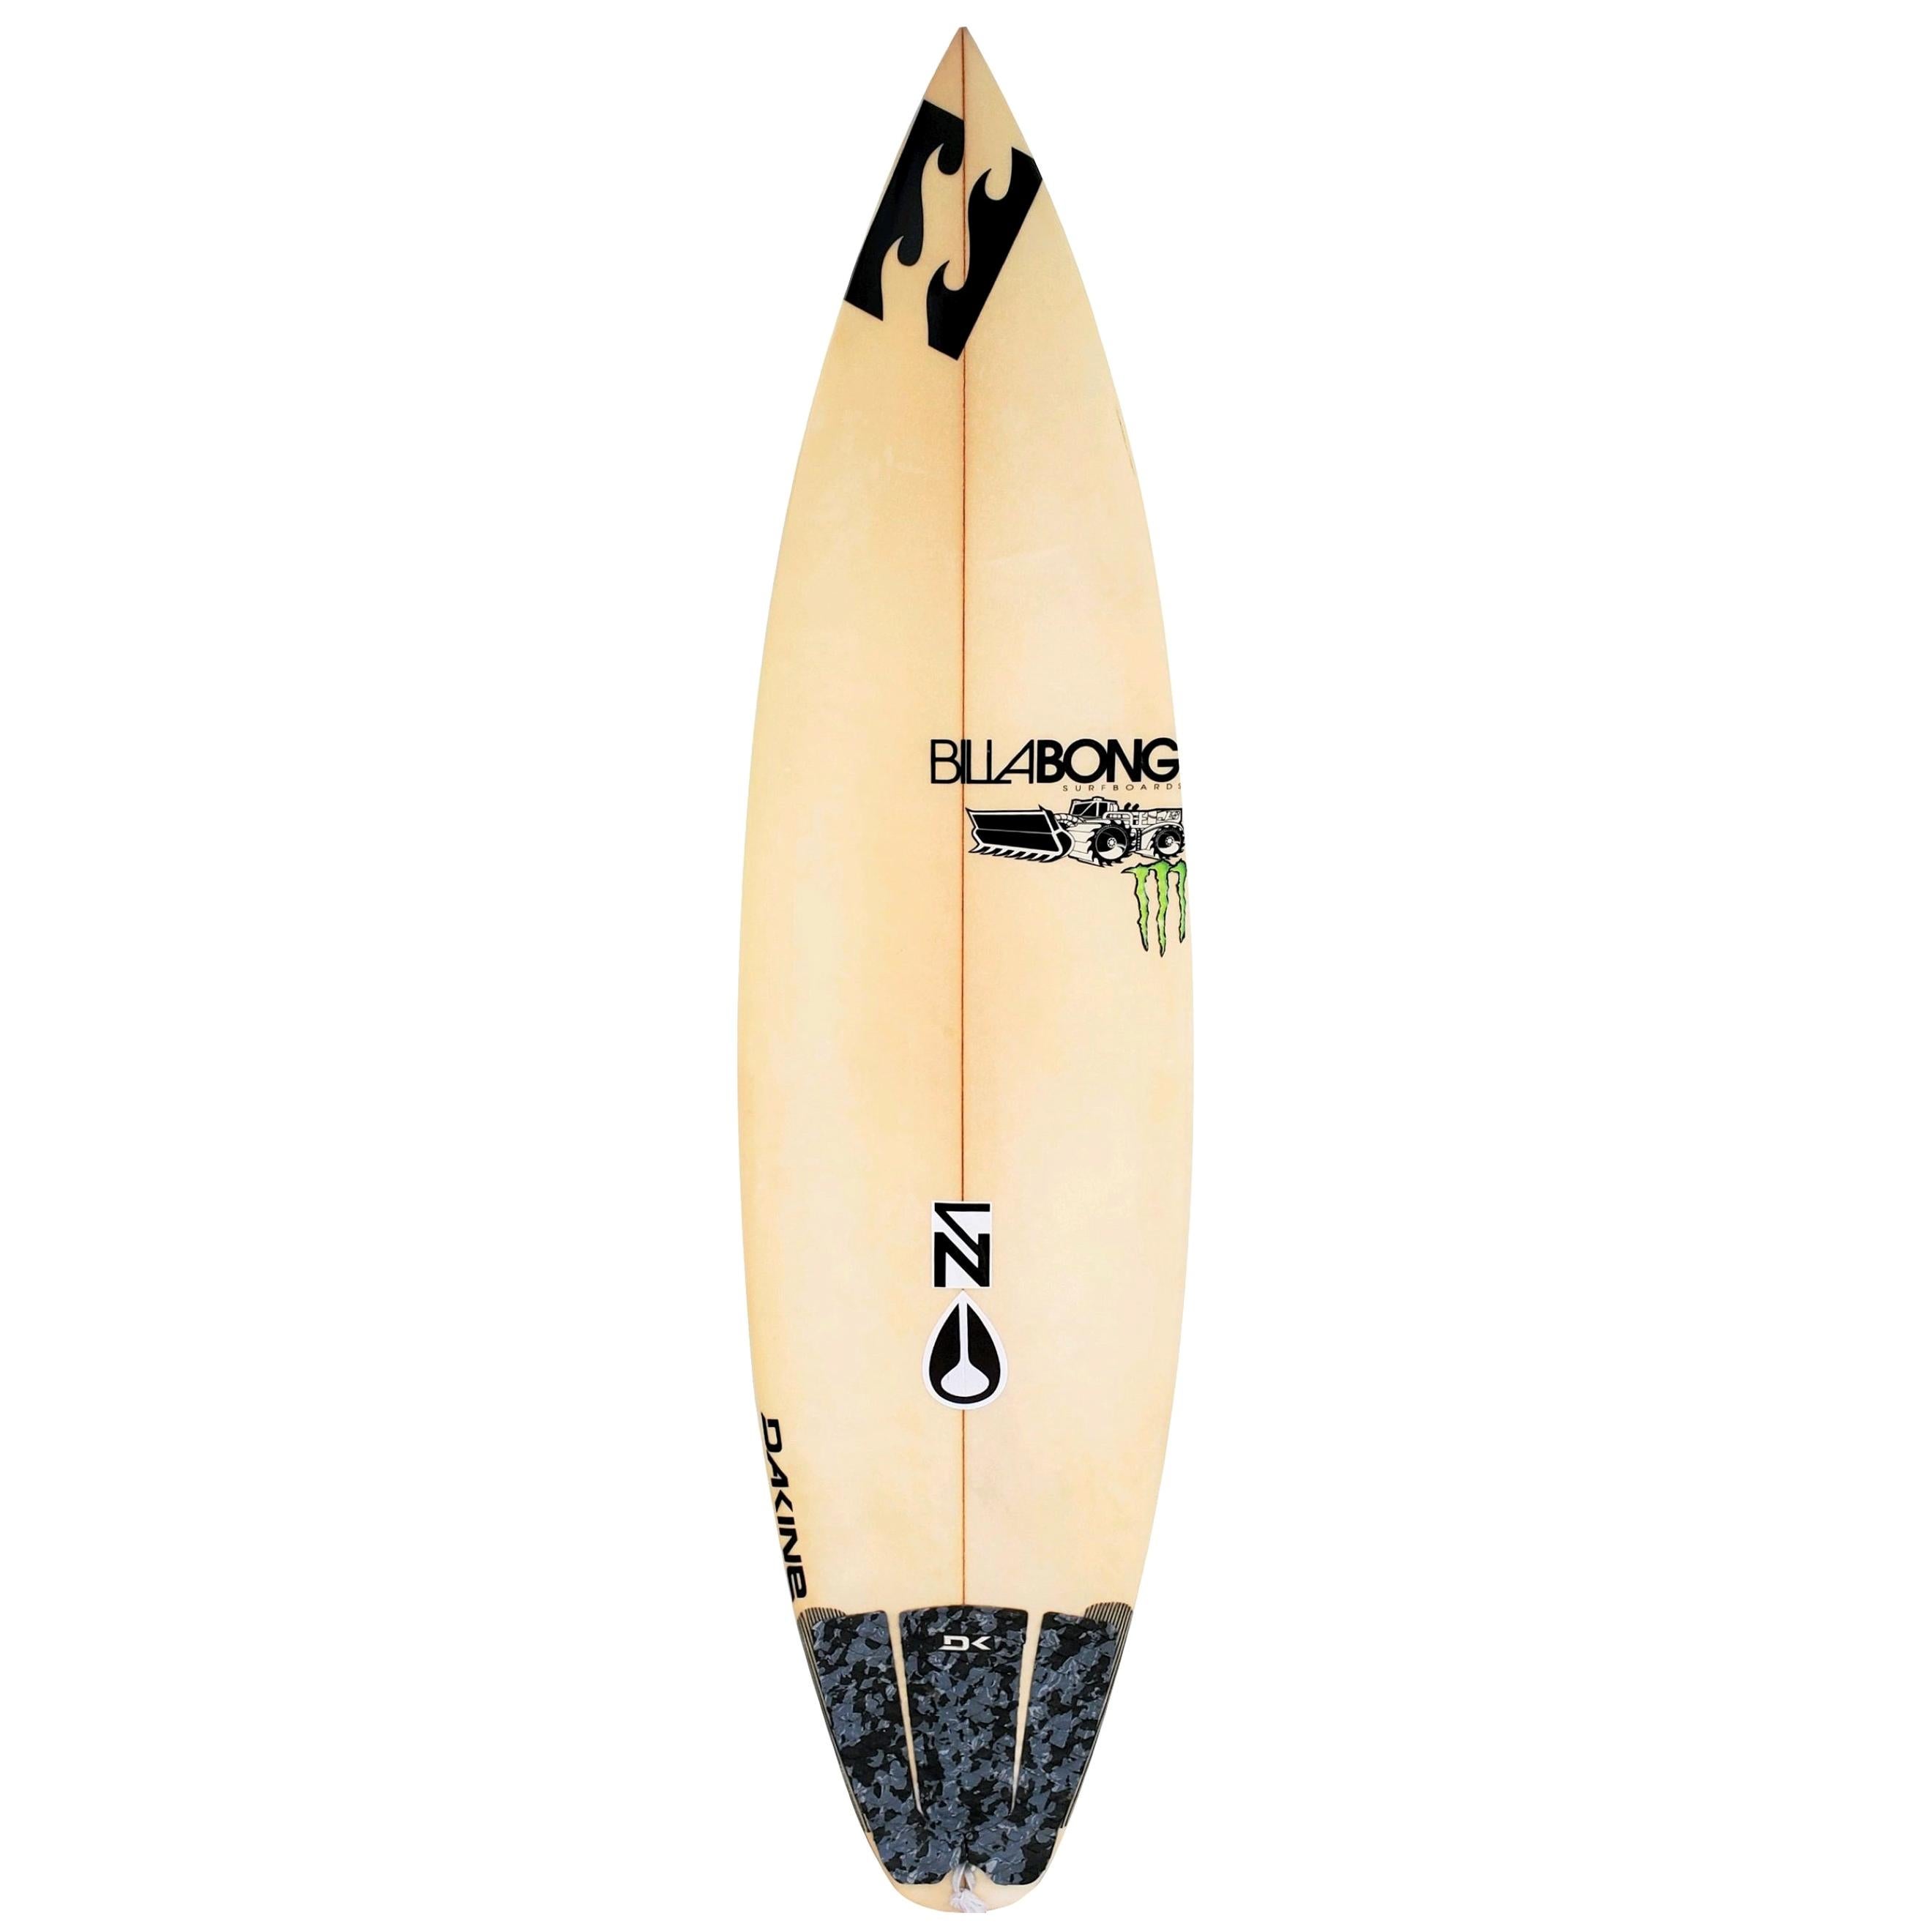 World Champion Andy Irons Personal Surfboard